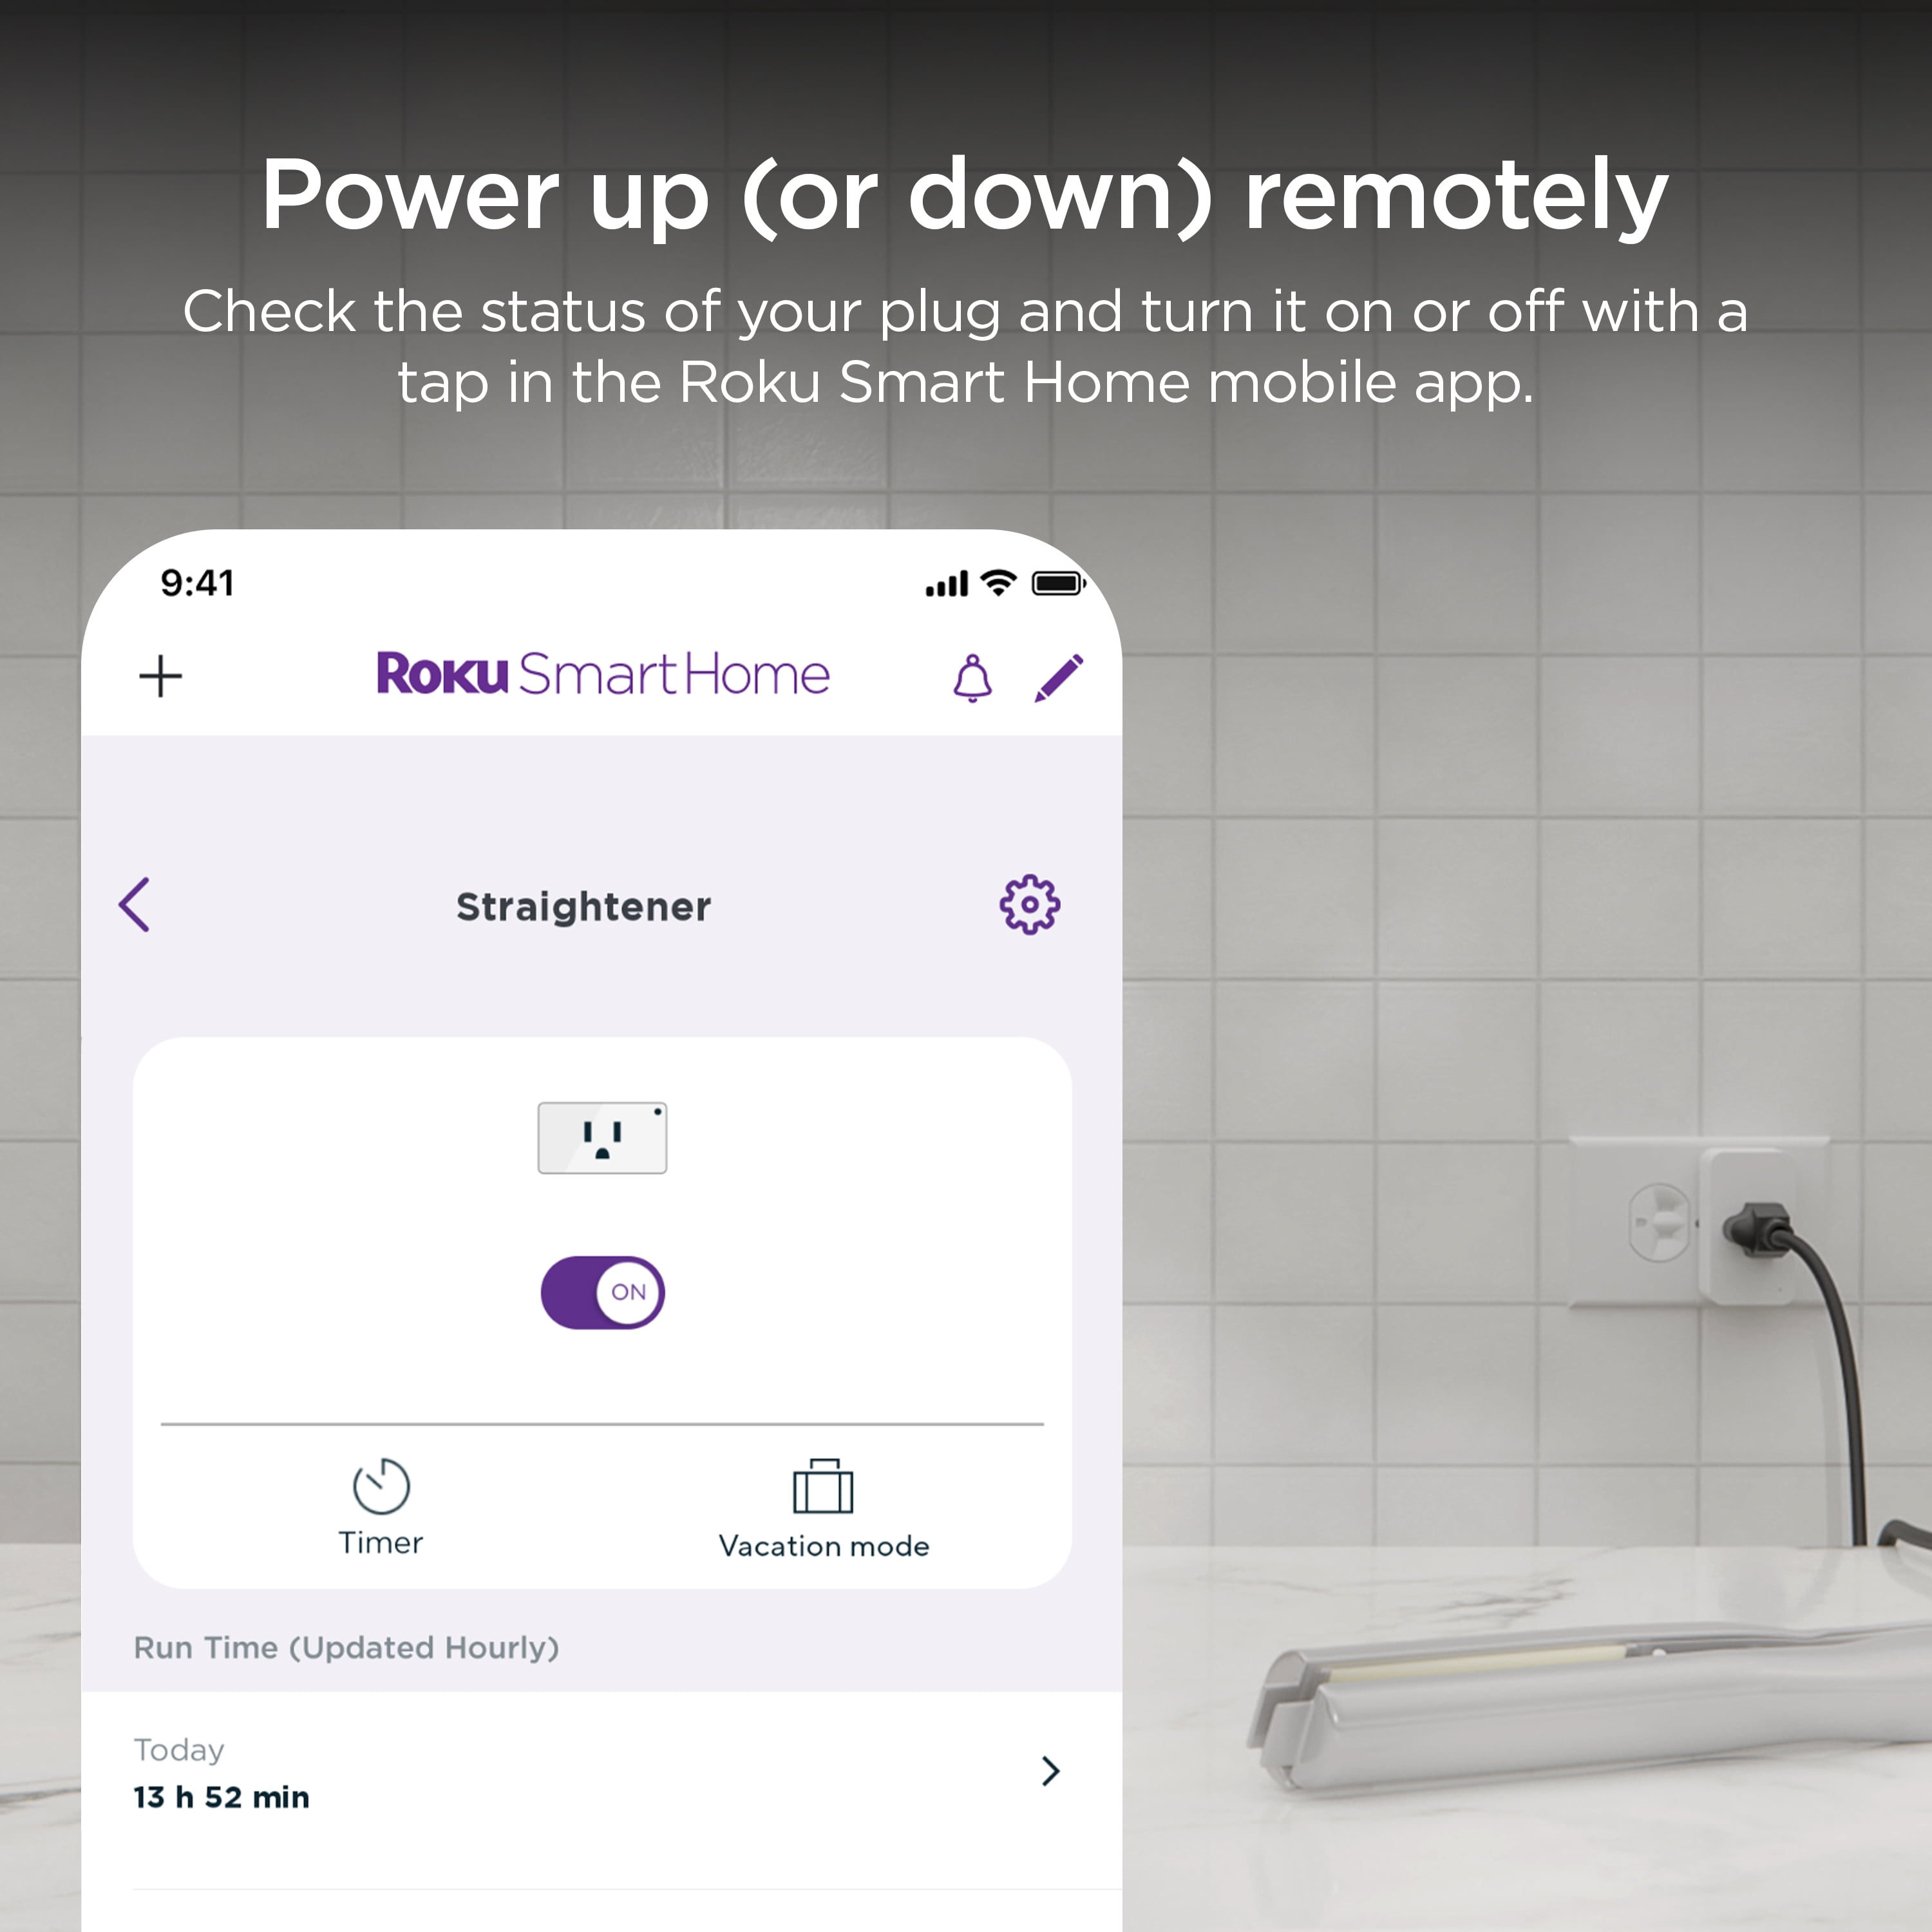 Roku Smart Home Indoor Smart Plug SE with Custom Scheduling, Remote Power,  and Voice Control - up to 15 Amps 